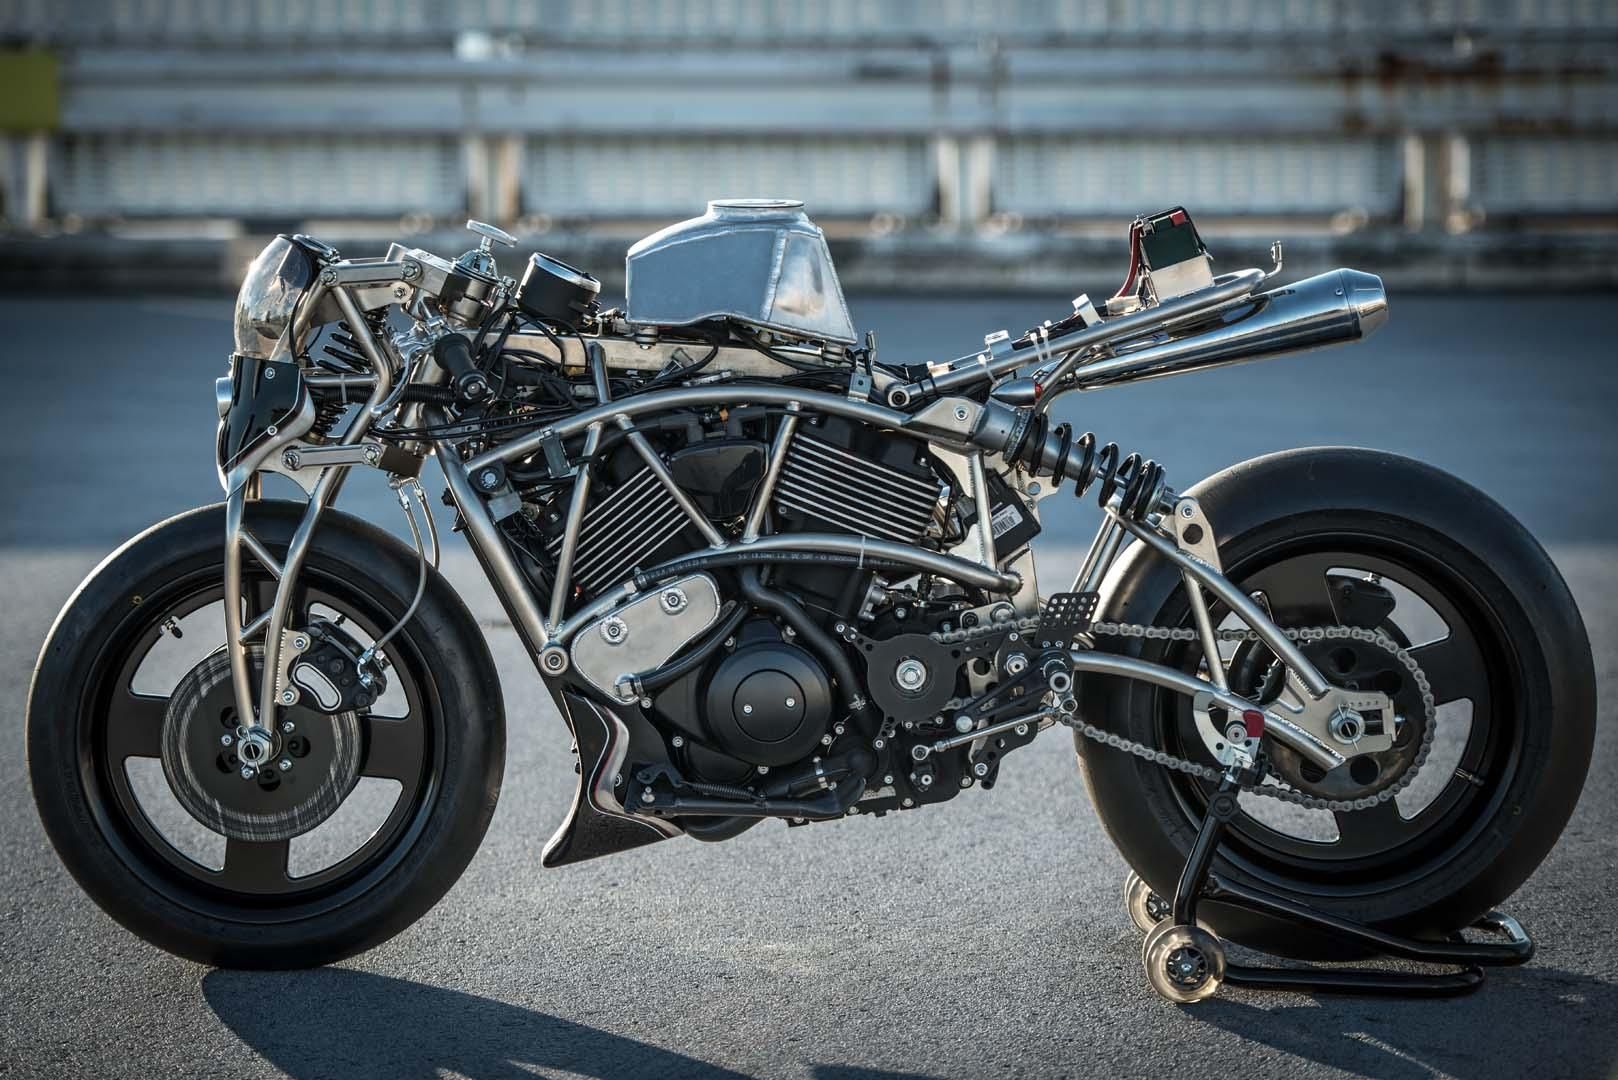 The XG750Turbo Street Fighter by Cherry’s Company